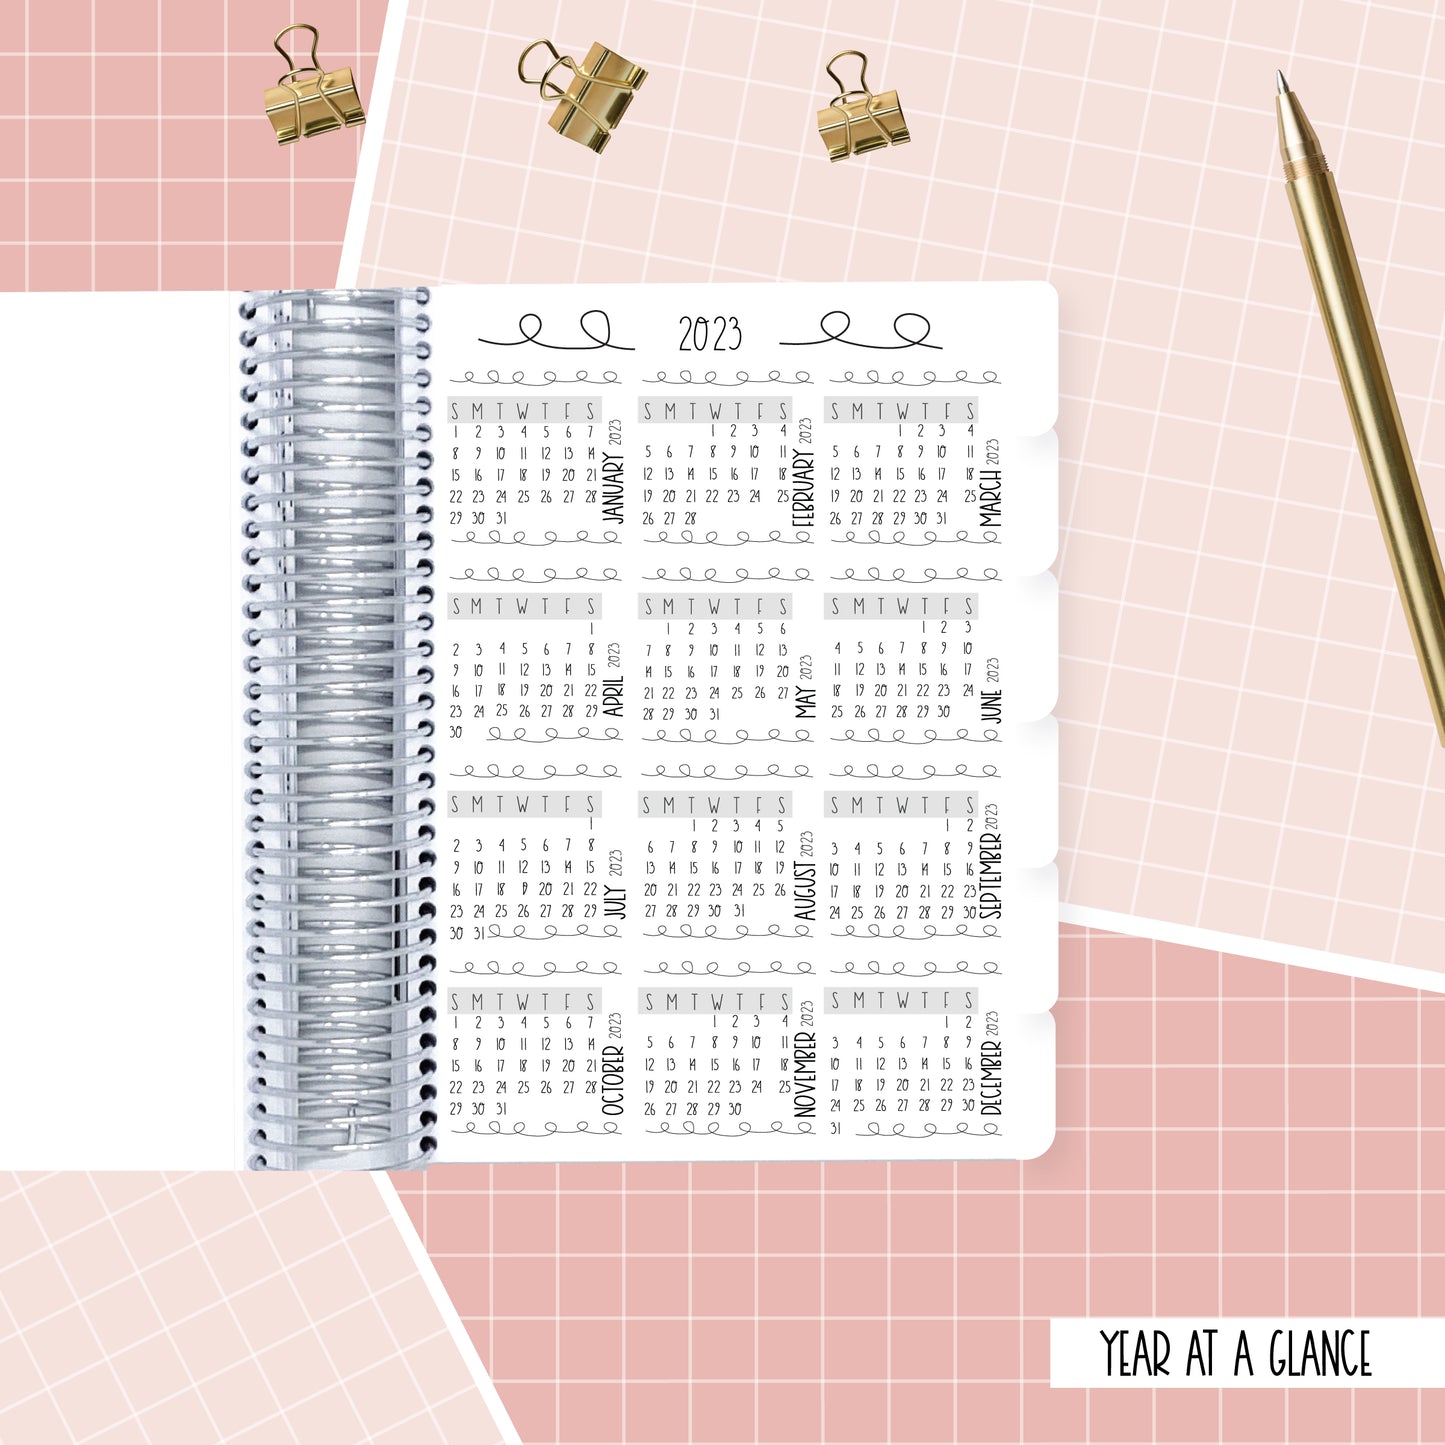 Cactus Rose - B6 Daily with Journaling Planner